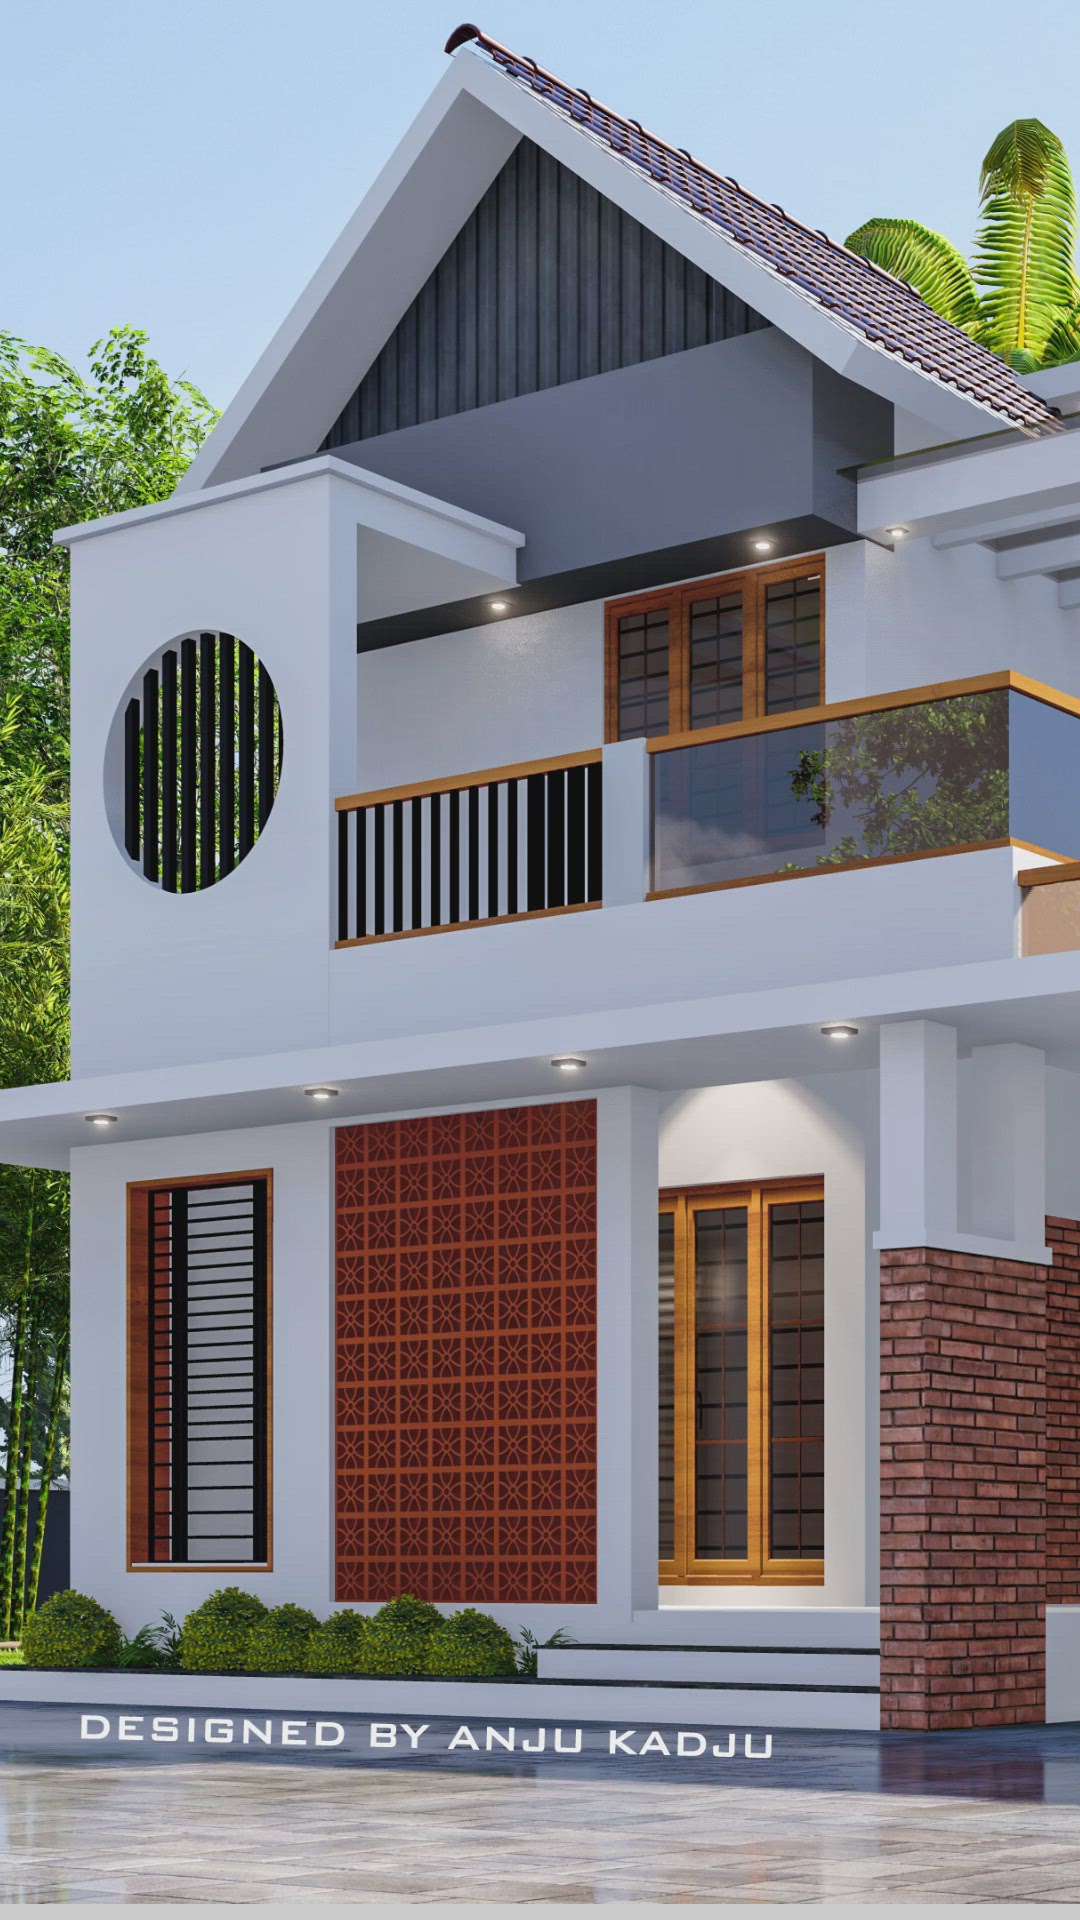 1918 sqft😍3 bhk house
Carporch,
sitout,
 pooja
living room
dining room
kitchen
workarea
3 bedroom and its 
attachedtoilet
staircase
upper living
balcony

 #modernhousedesigns #besthome #keralahousedesign